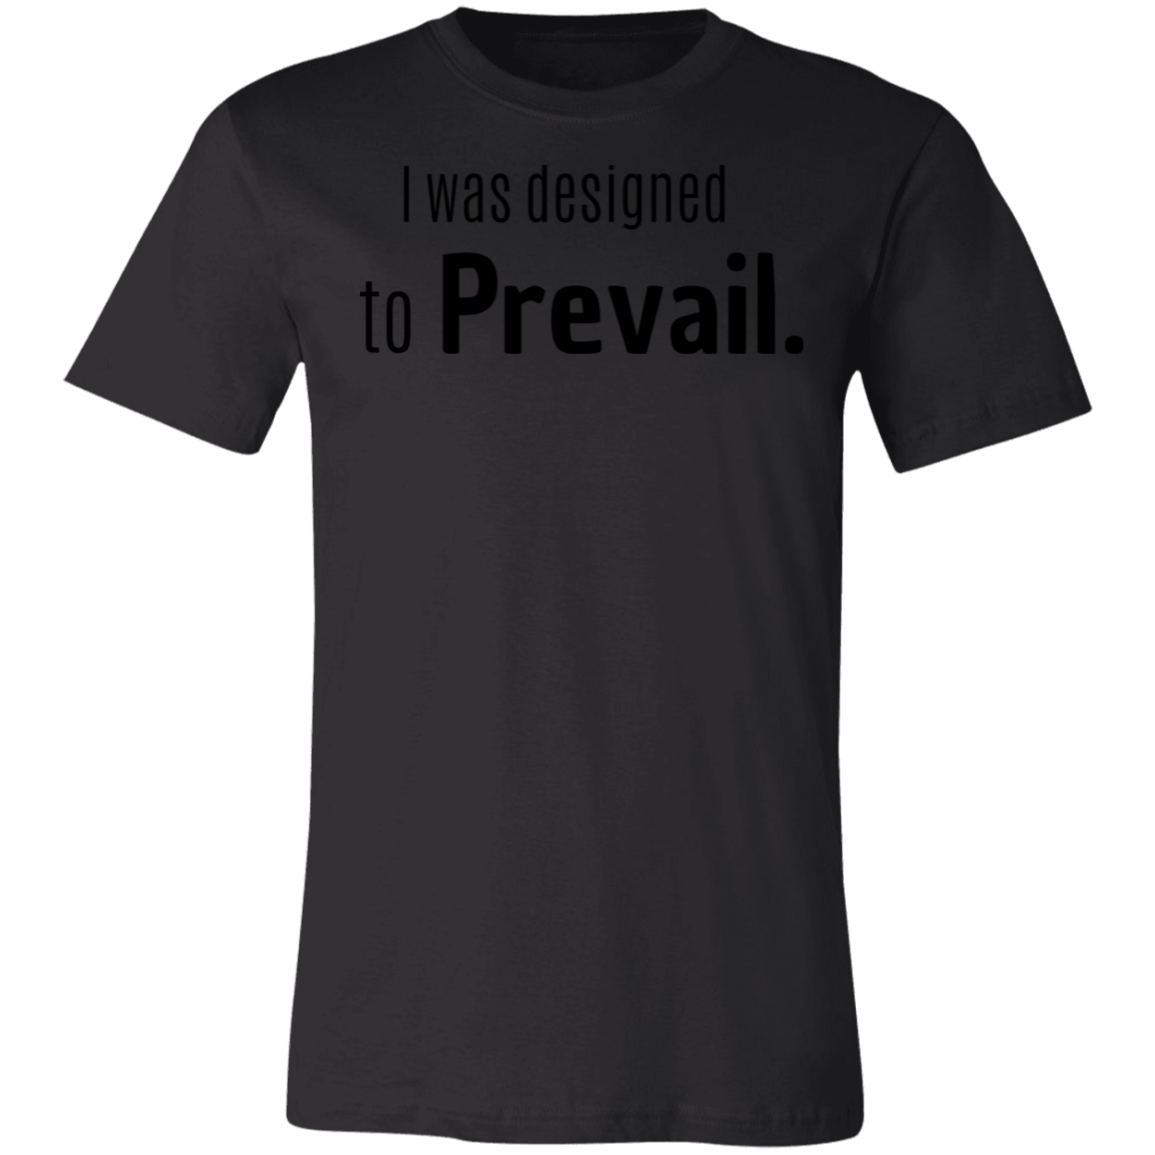 I was Designed to Prevail Unisex Short-Sleeve T-Shirt